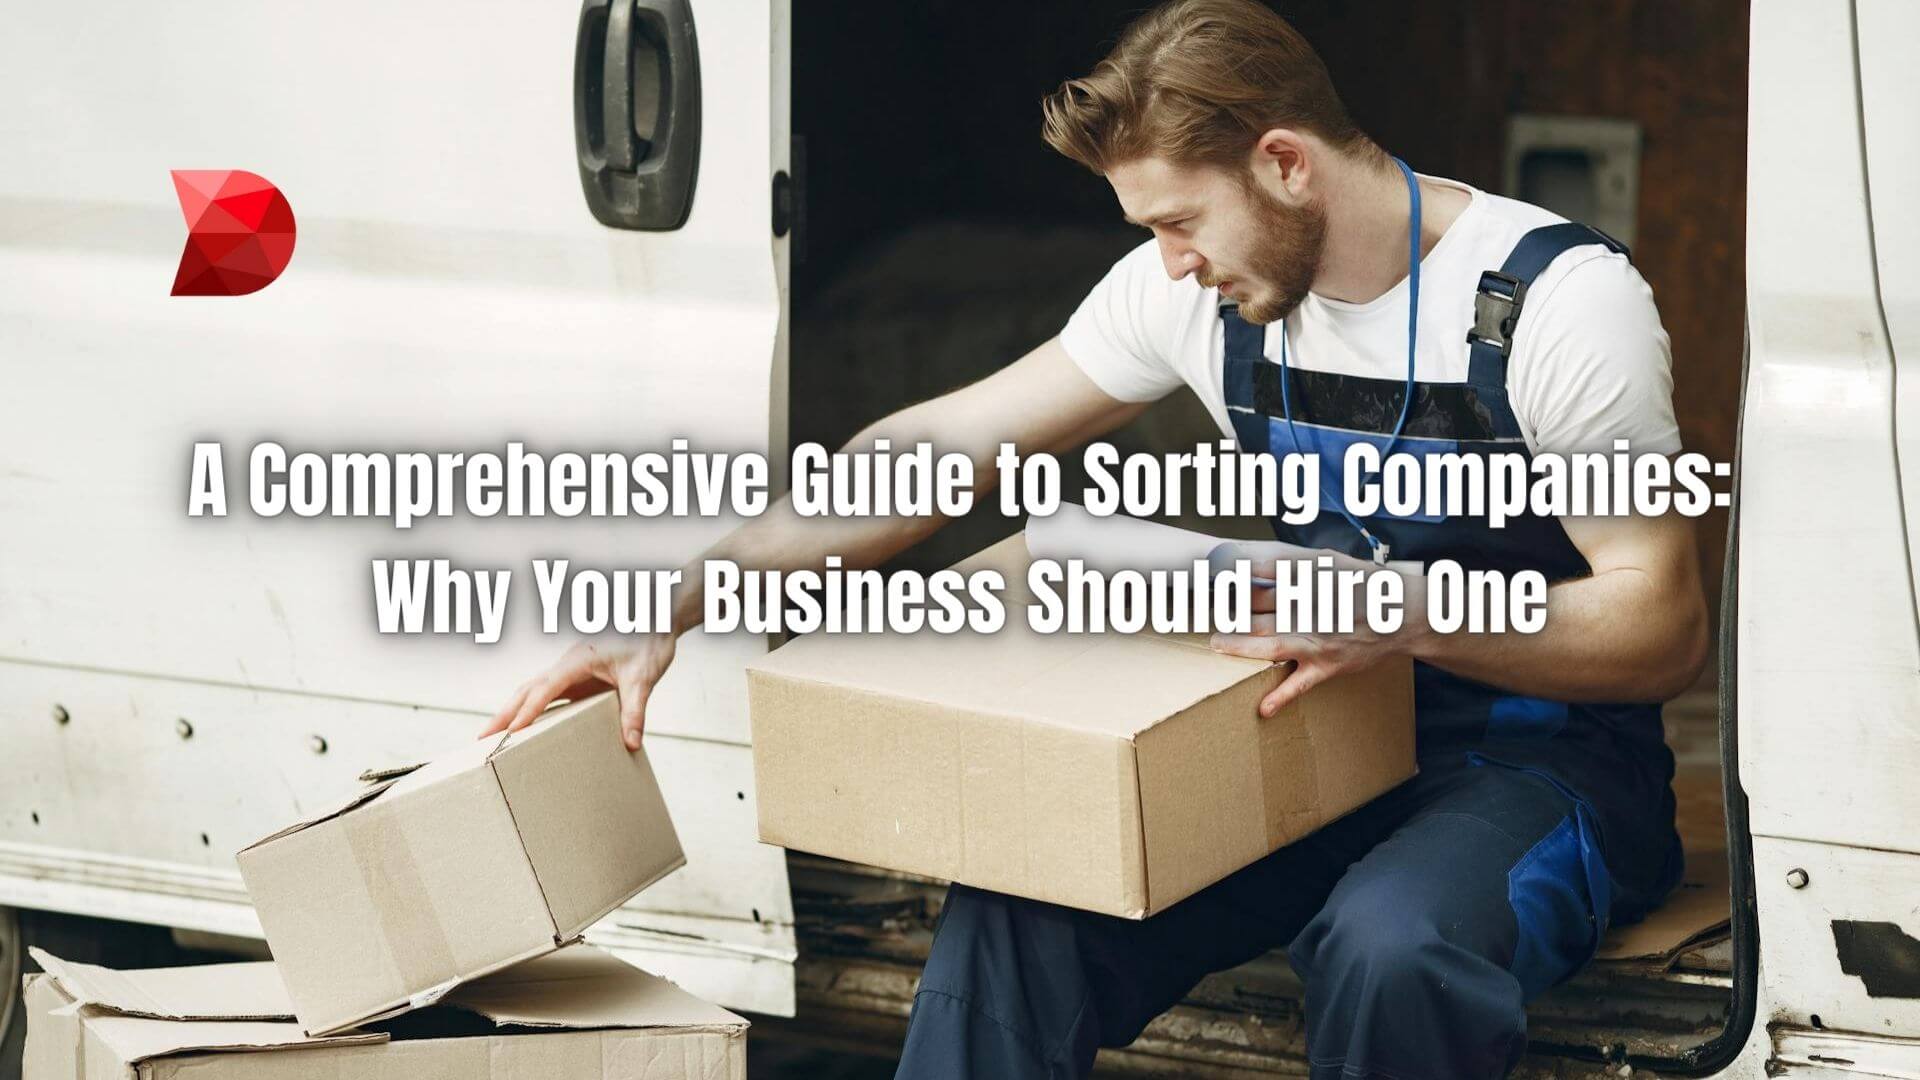 Unlock the advantages of enlisting a sorting company for your business. Learn why it's a smart move in our informative guide.